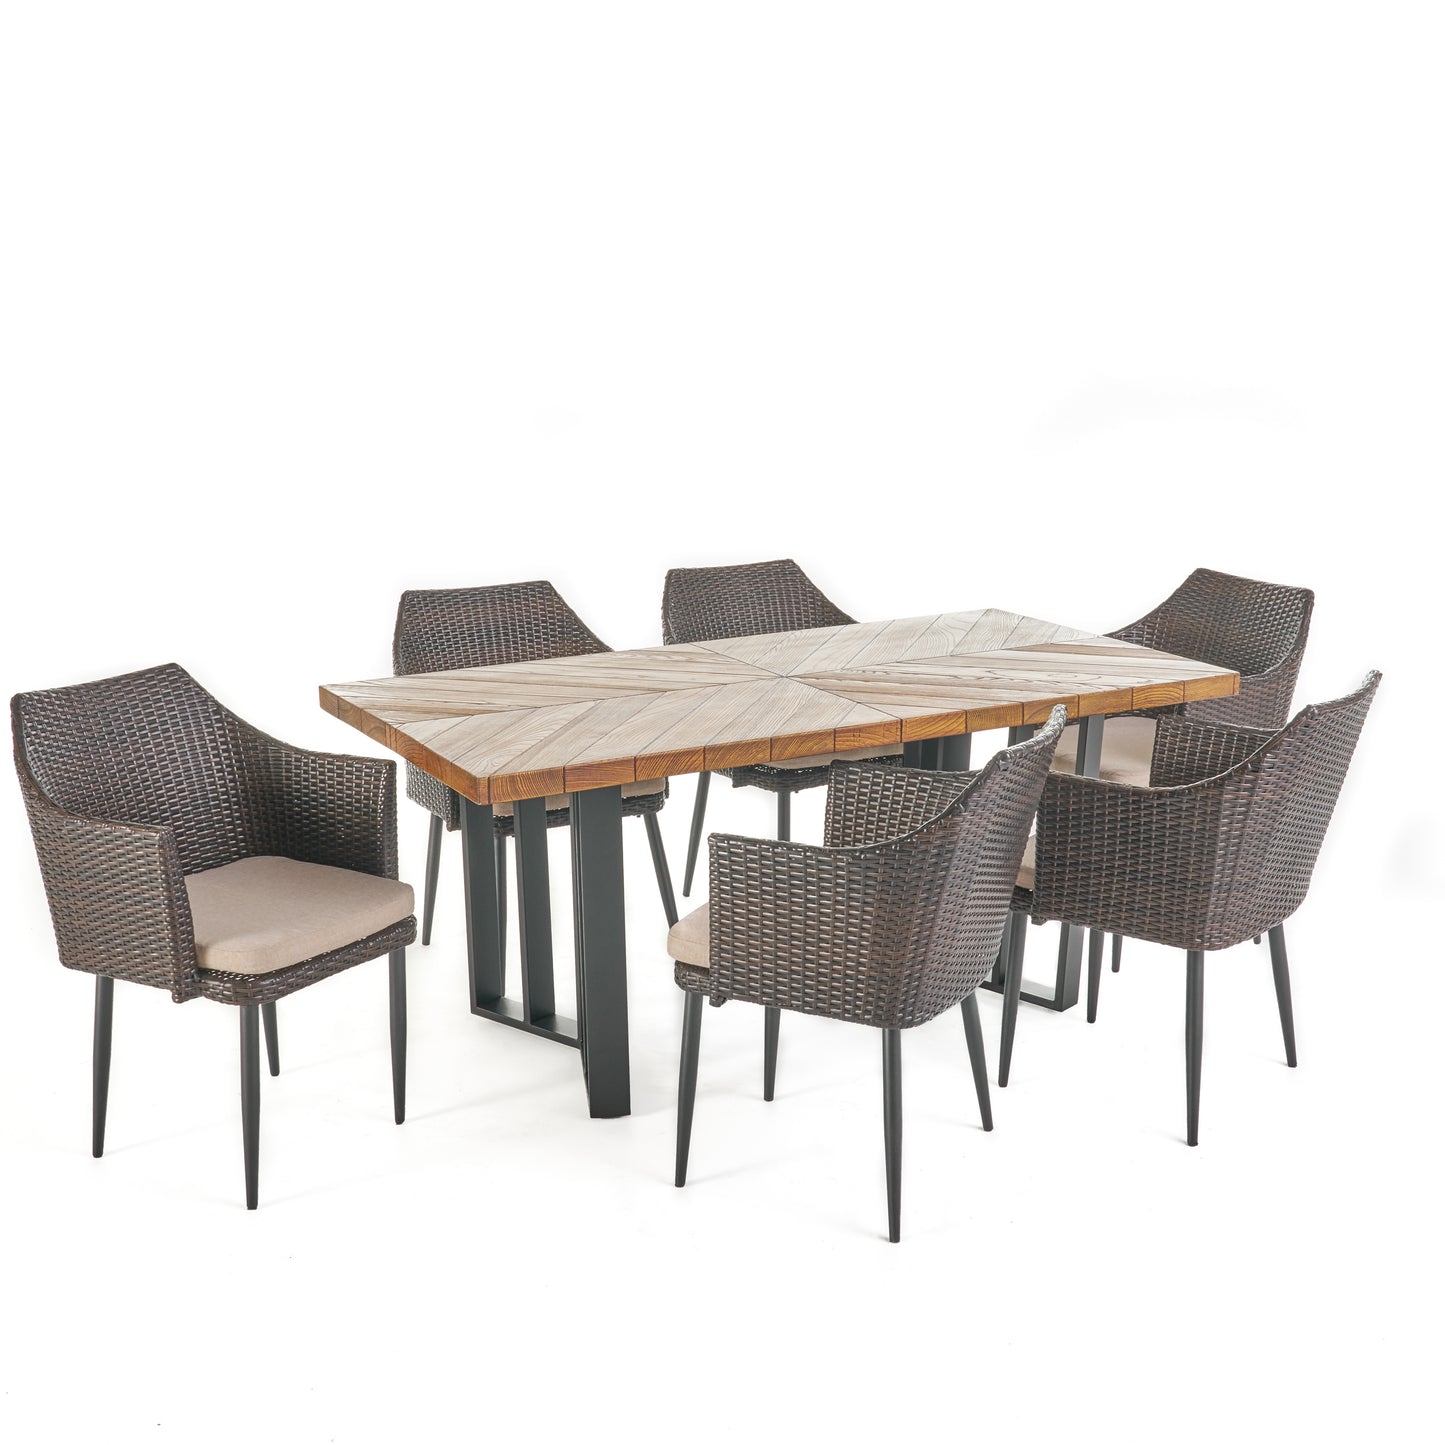 Tammy Outdoor 7 Piece Wicker Dining Set with Concrete Dining Table